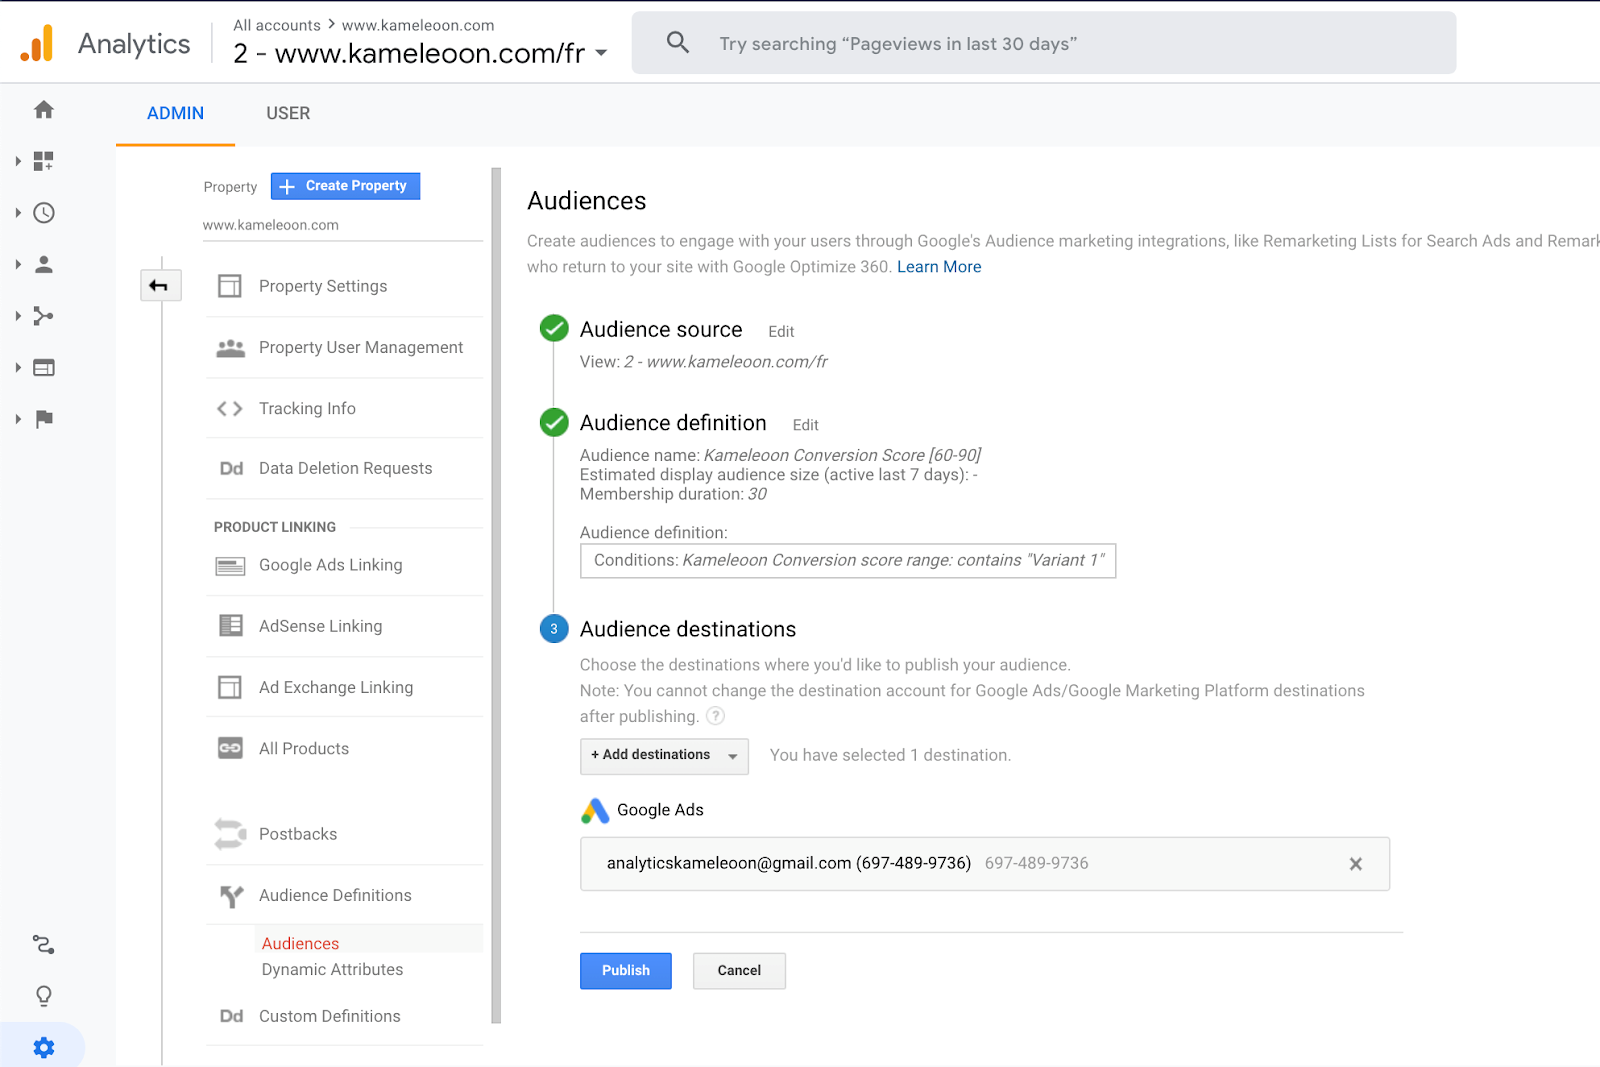 How to link Google Analytics to Google Ads account to use the audience